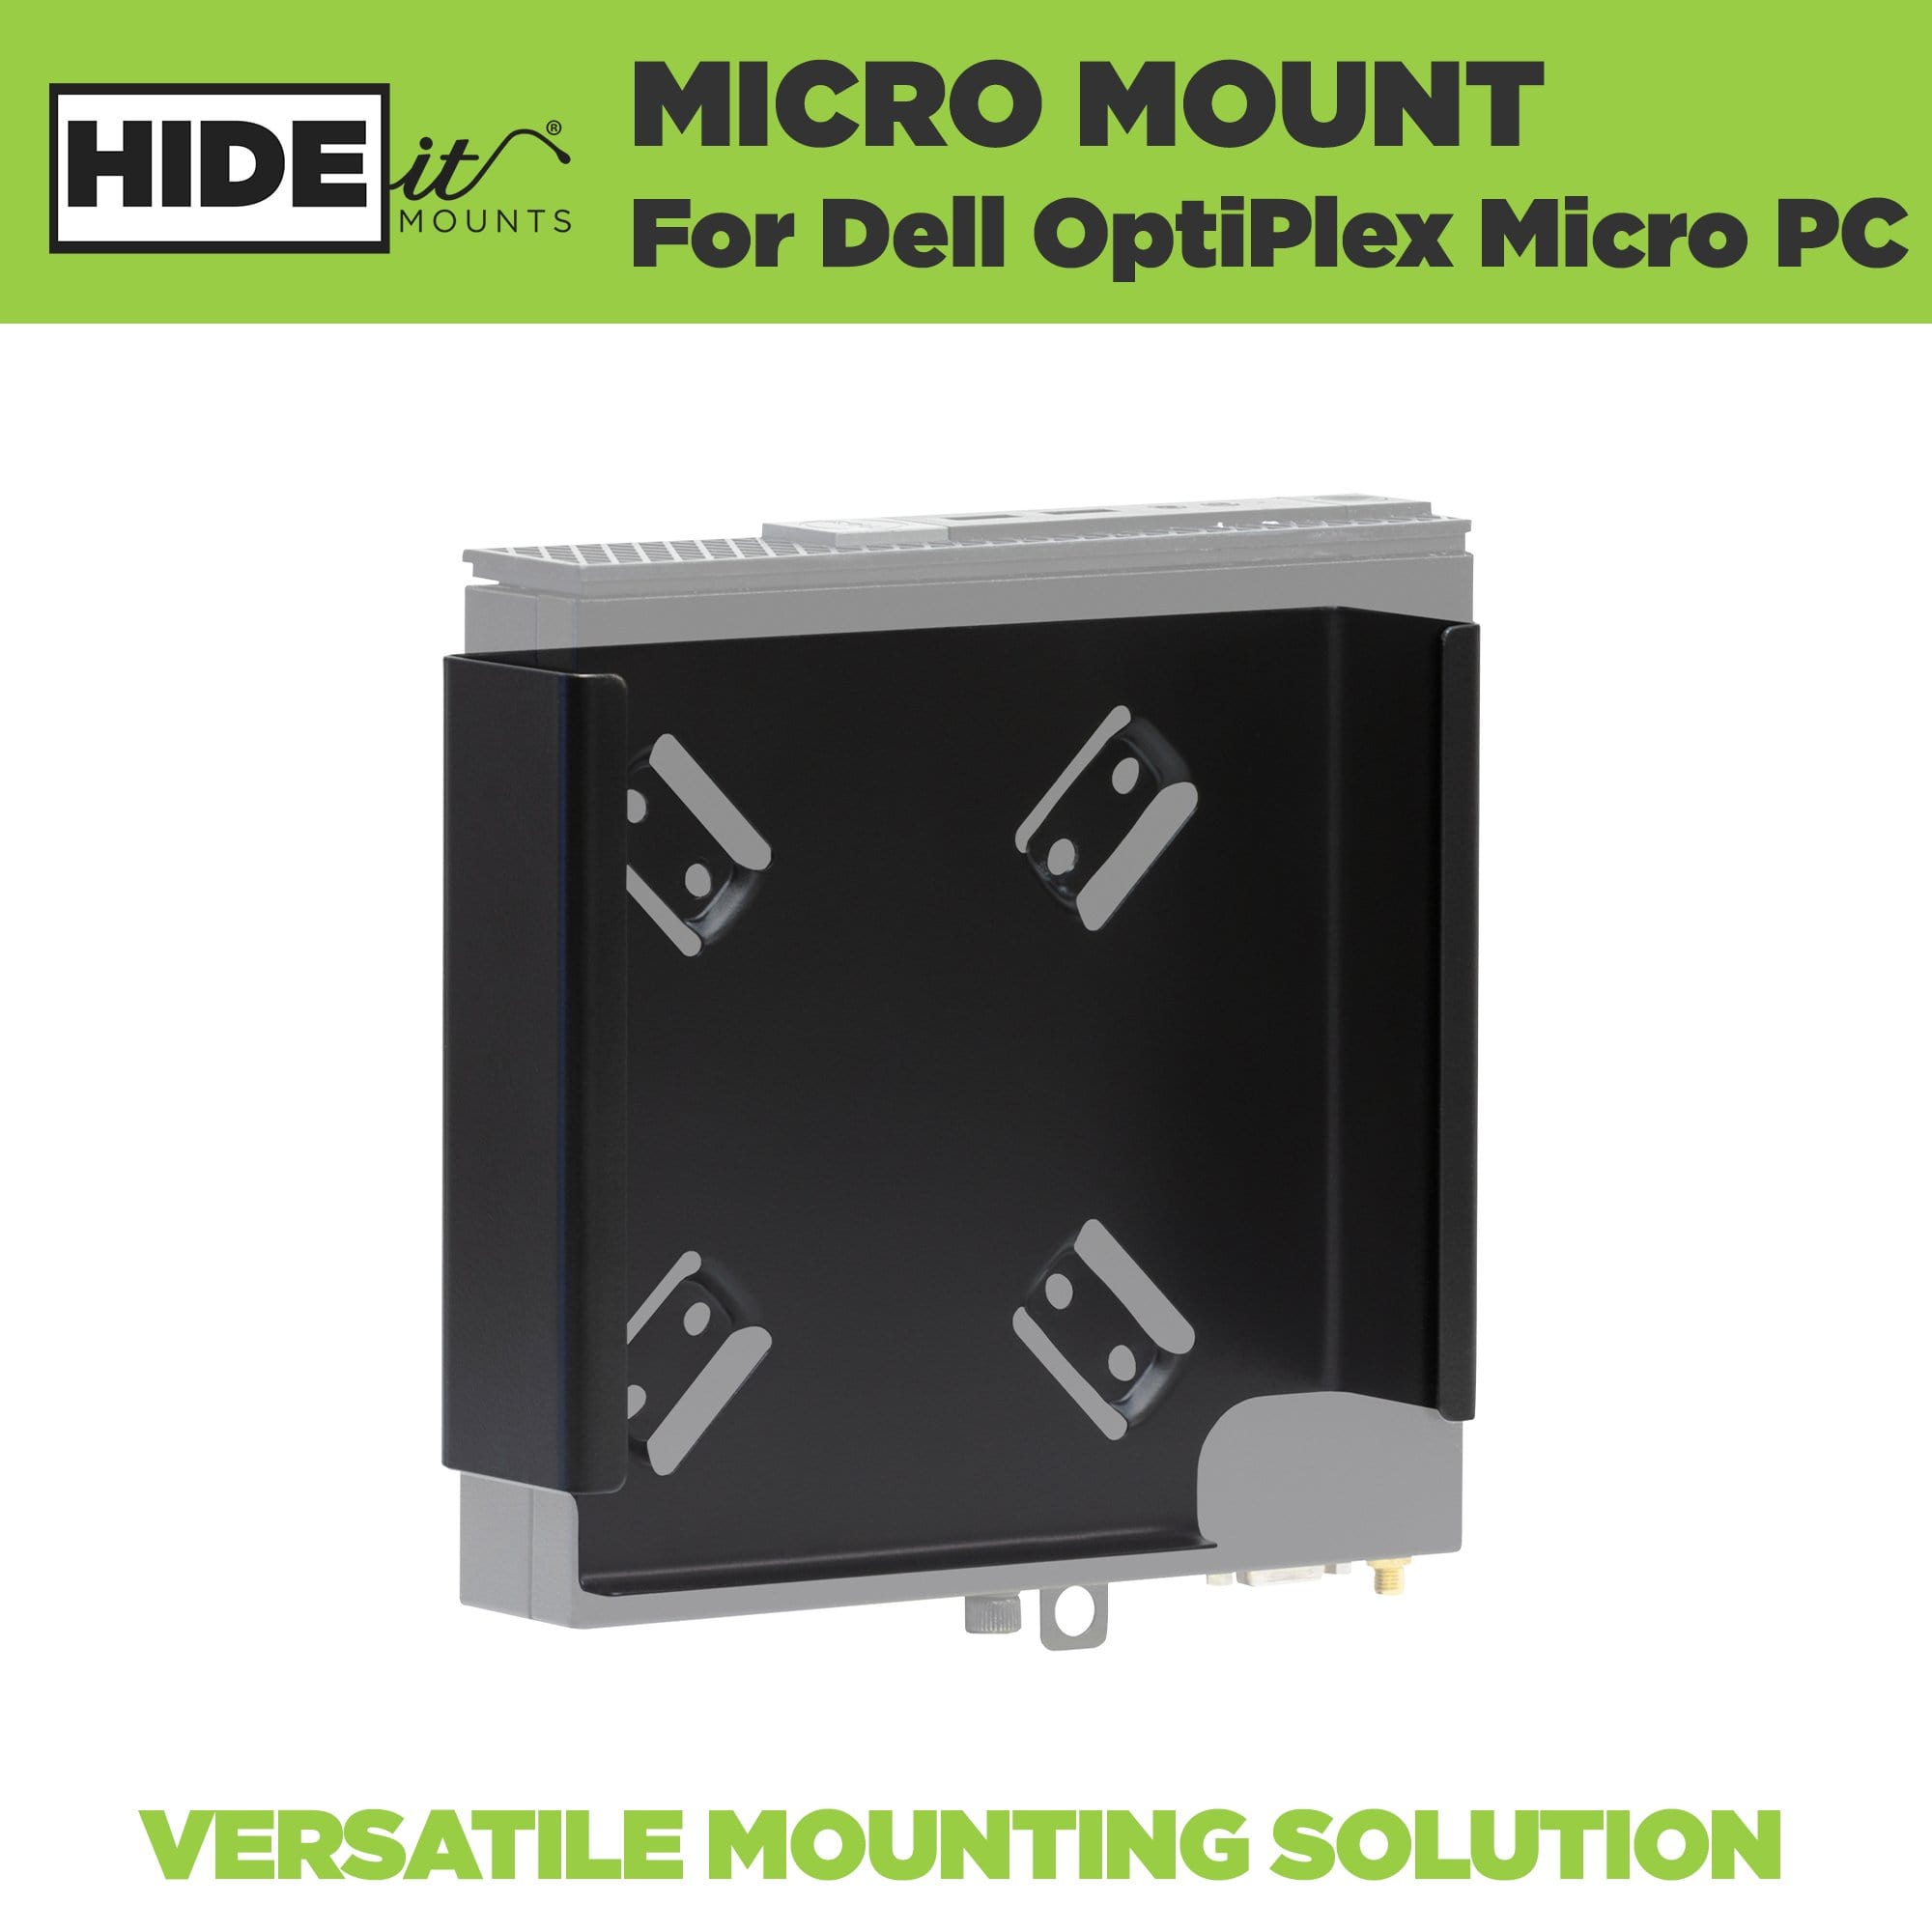 Dell Optiplex Micro securely mounted in the steel HIDEit Dell Optiplex Mount designed for the Dell Micro PC.